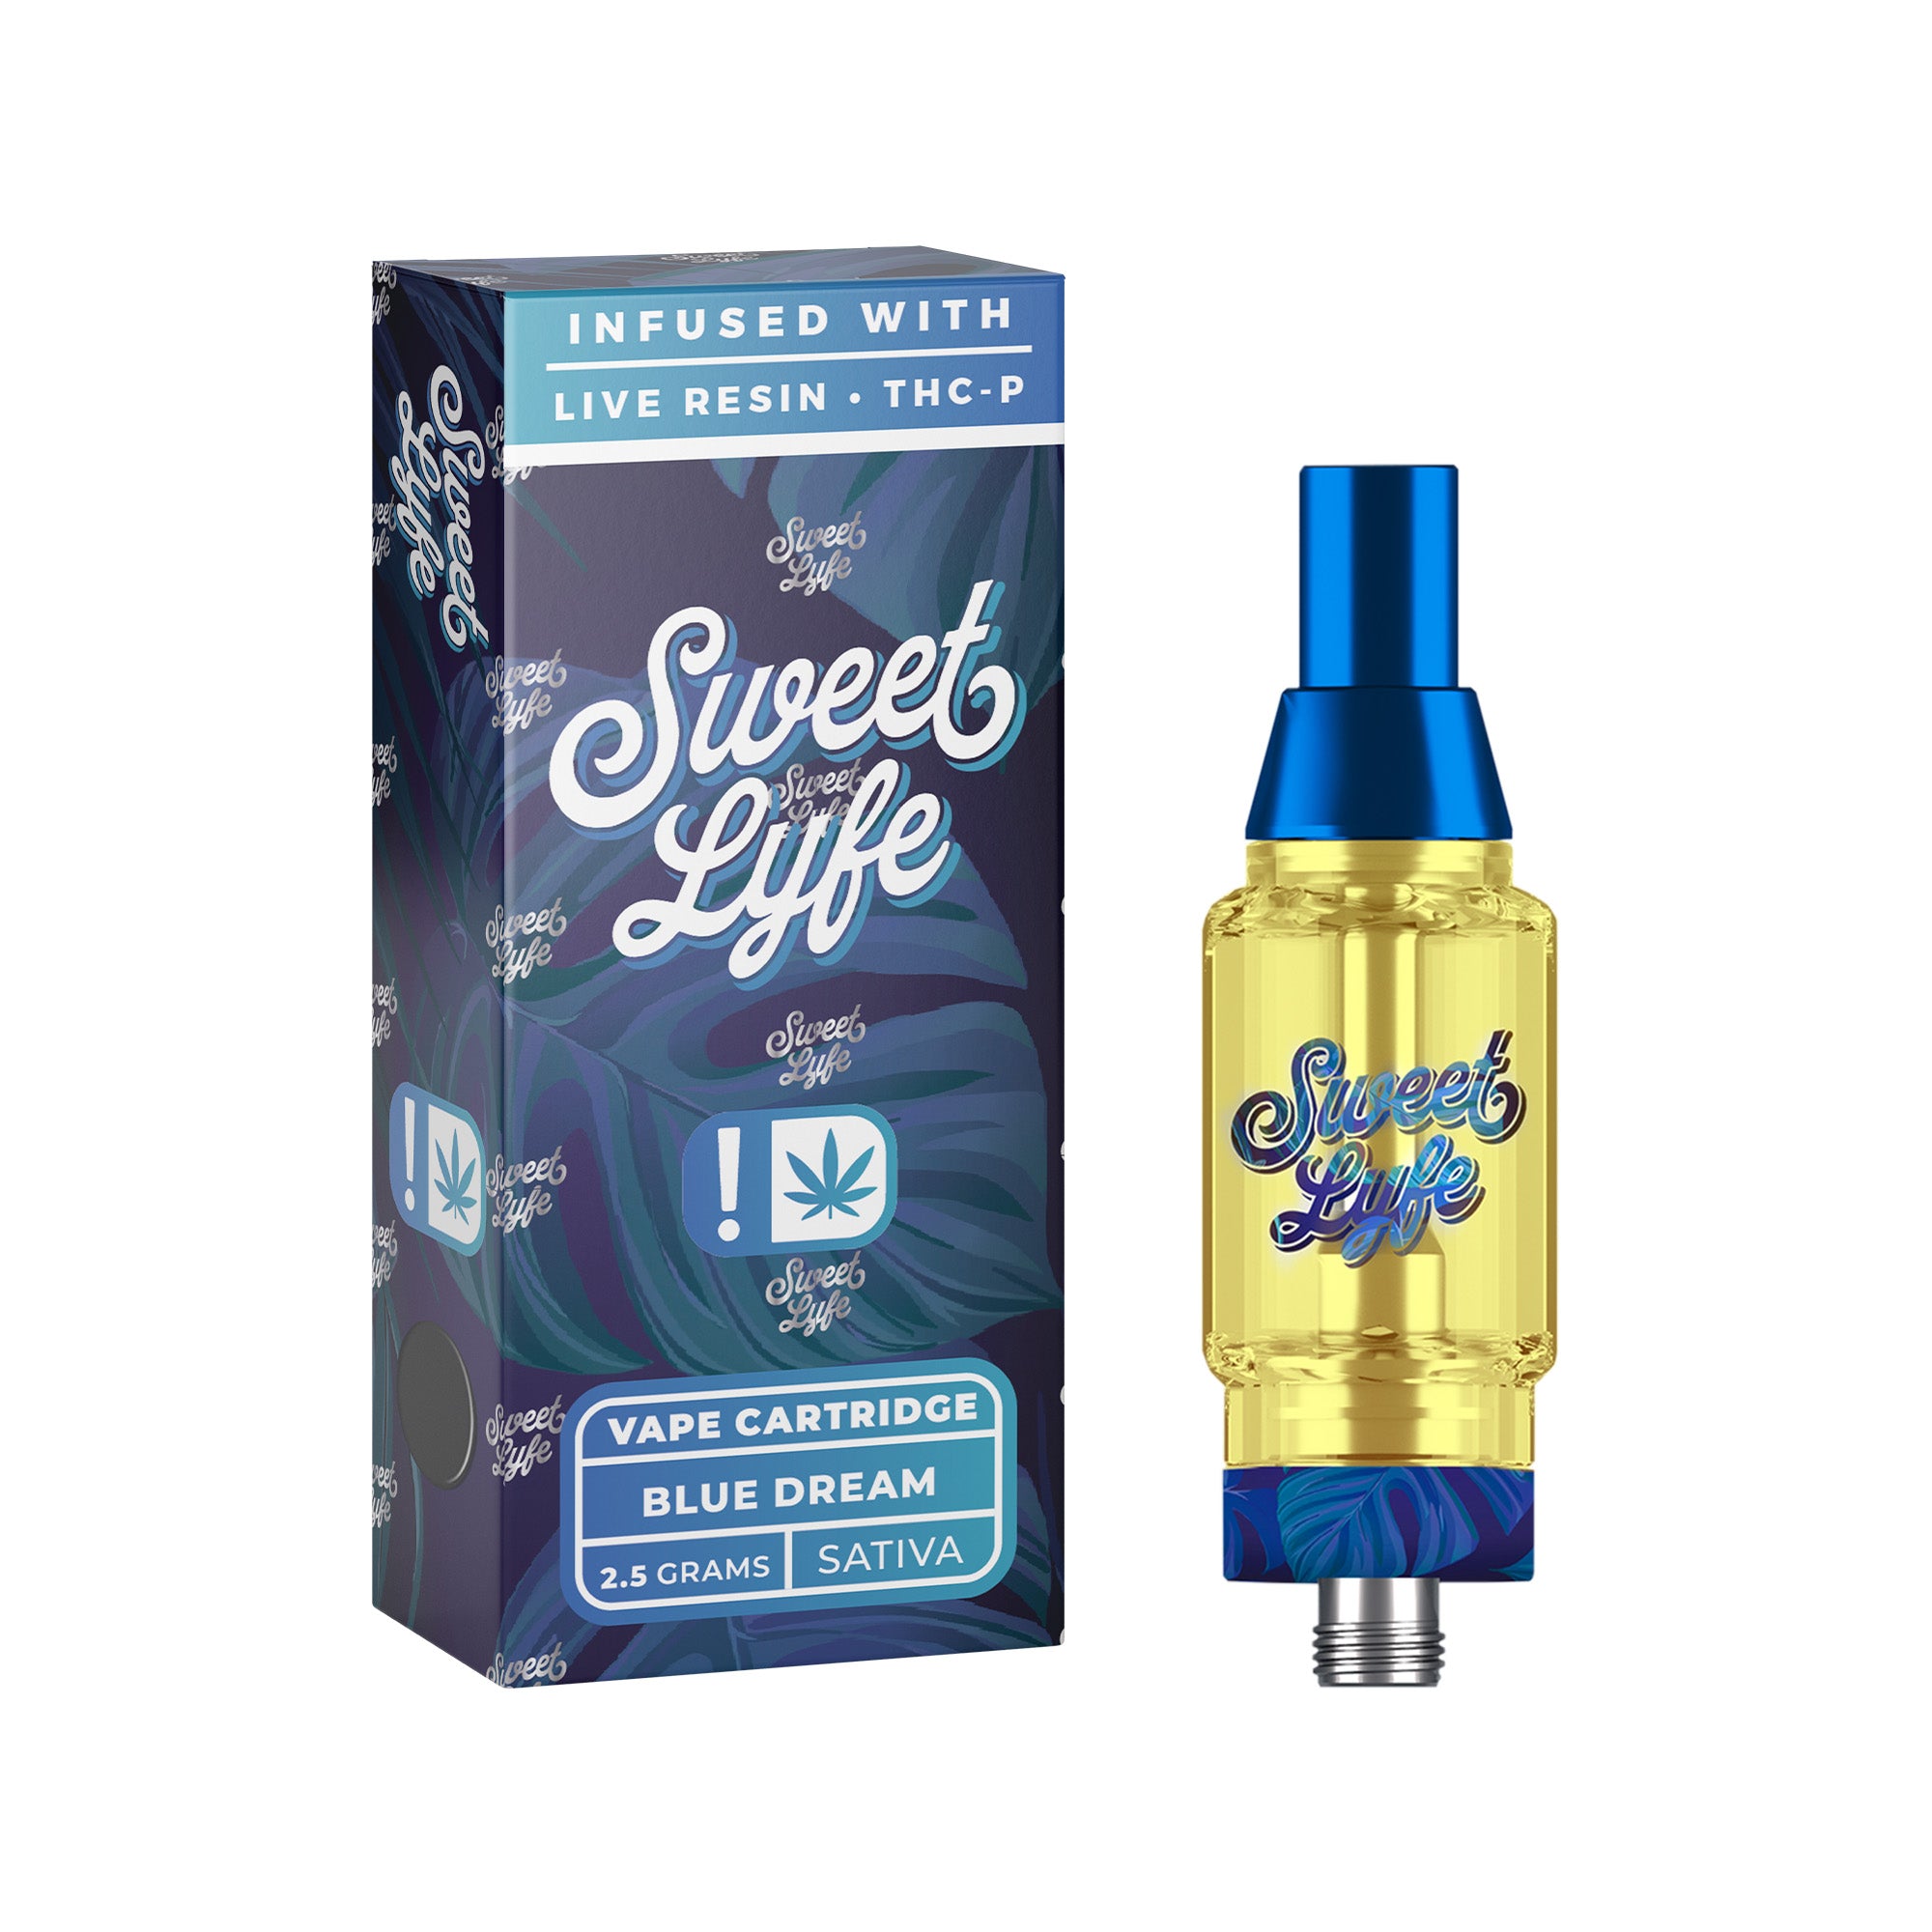 Vape Cartridges 2.5ml Infused with Live Resin Delta-8 + THCP - Blue Dream - Sativa